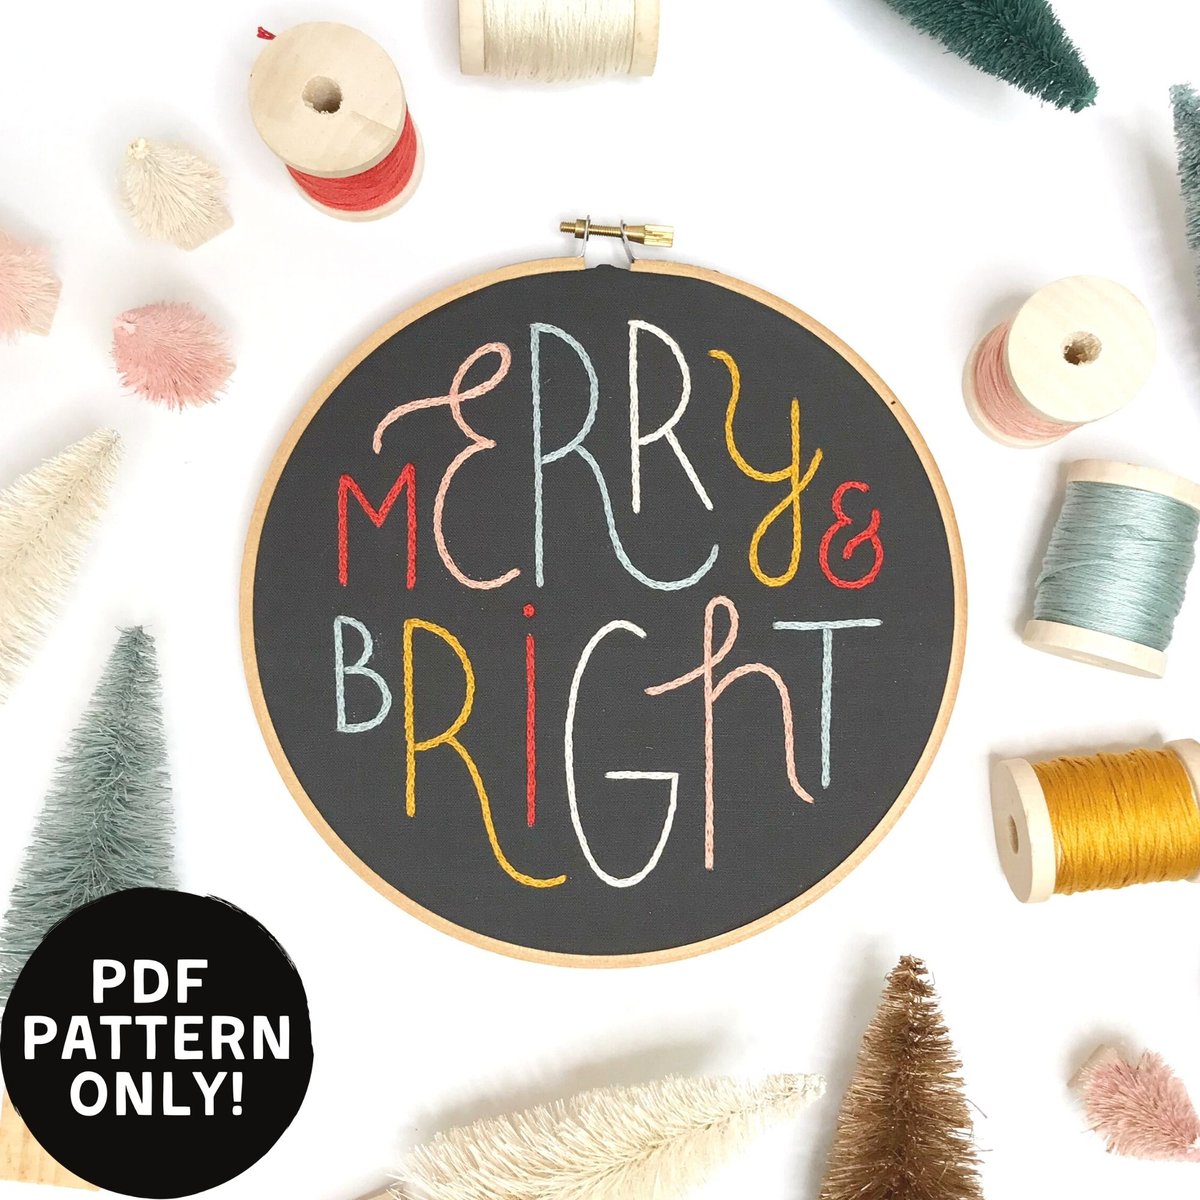 Merry and Bright - Christmas Holiday Embroidery Pattern - PDF ONLY!